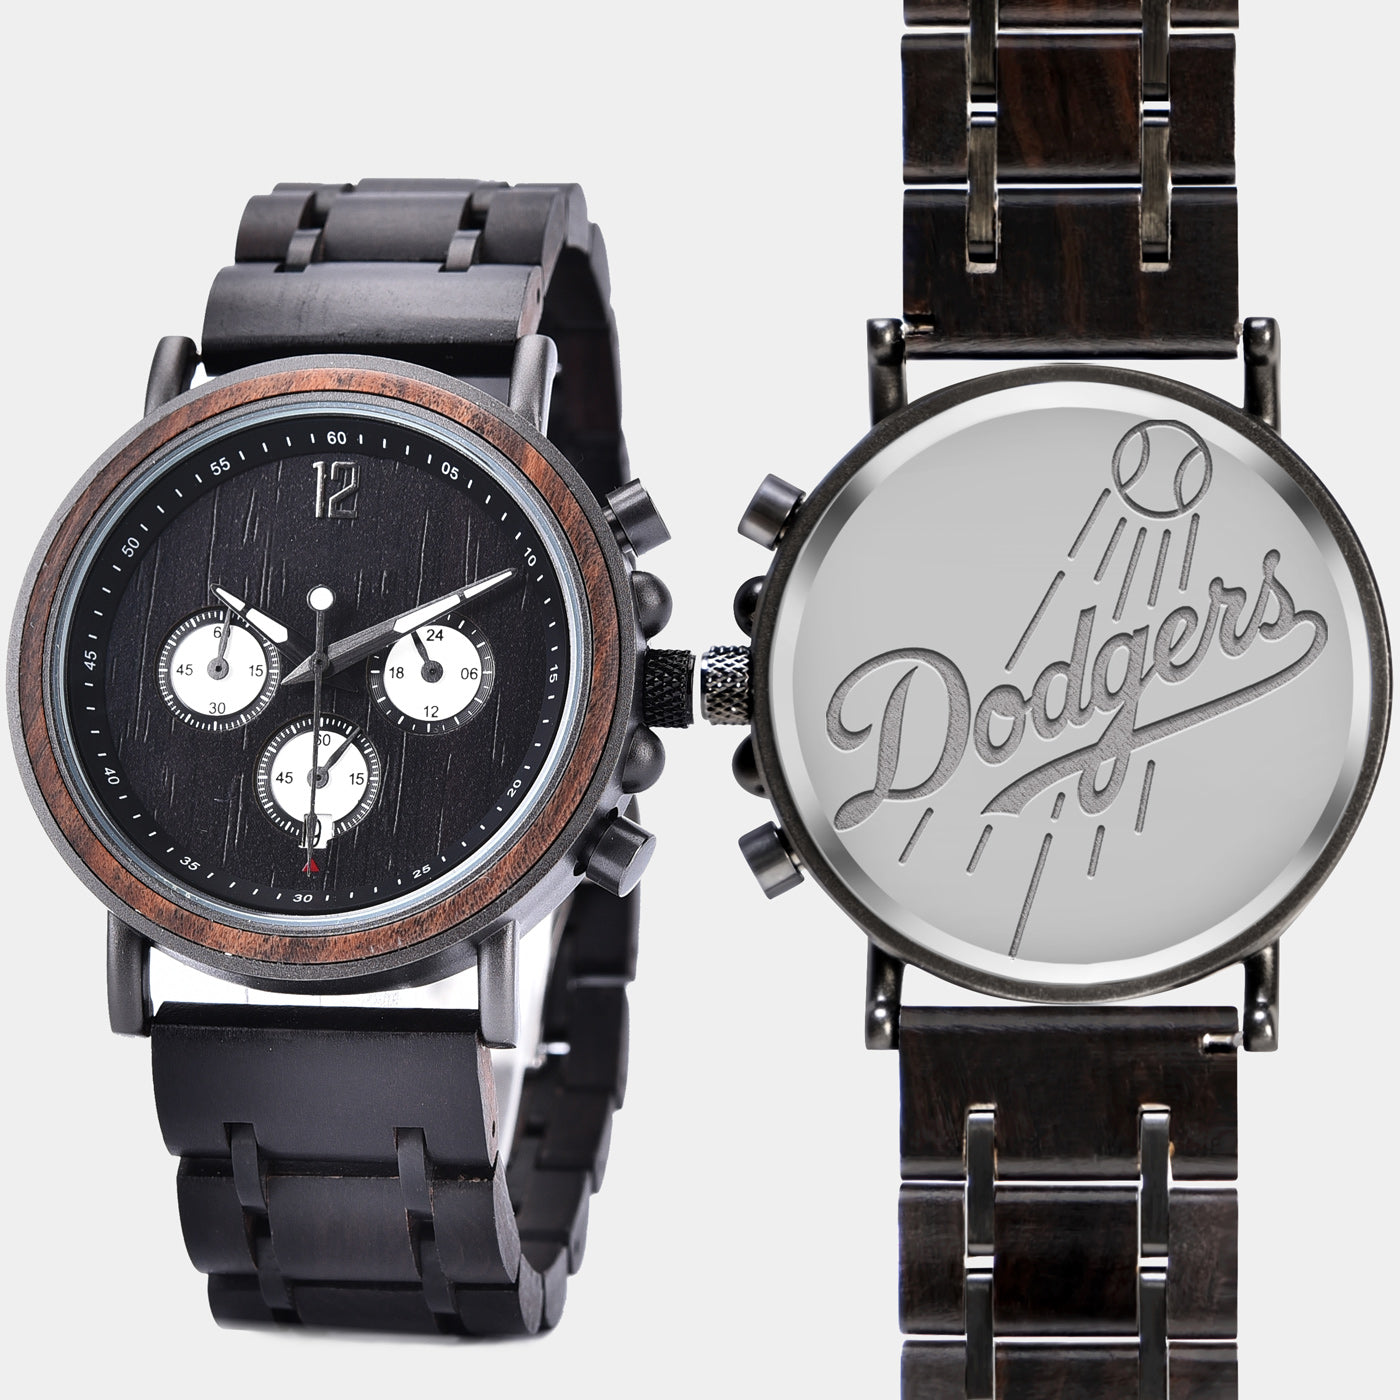 Los Angeles Dodgers Mens Wrist Watch  - Personalized Los Angeles Dodgers Mens Watches - Custom Gifts For Him, Birthday Gifts, Gift For Dad - Best 2022 Los Angeles Dodgers Christmas Gifts - Black 45mm MLB Wood Watch